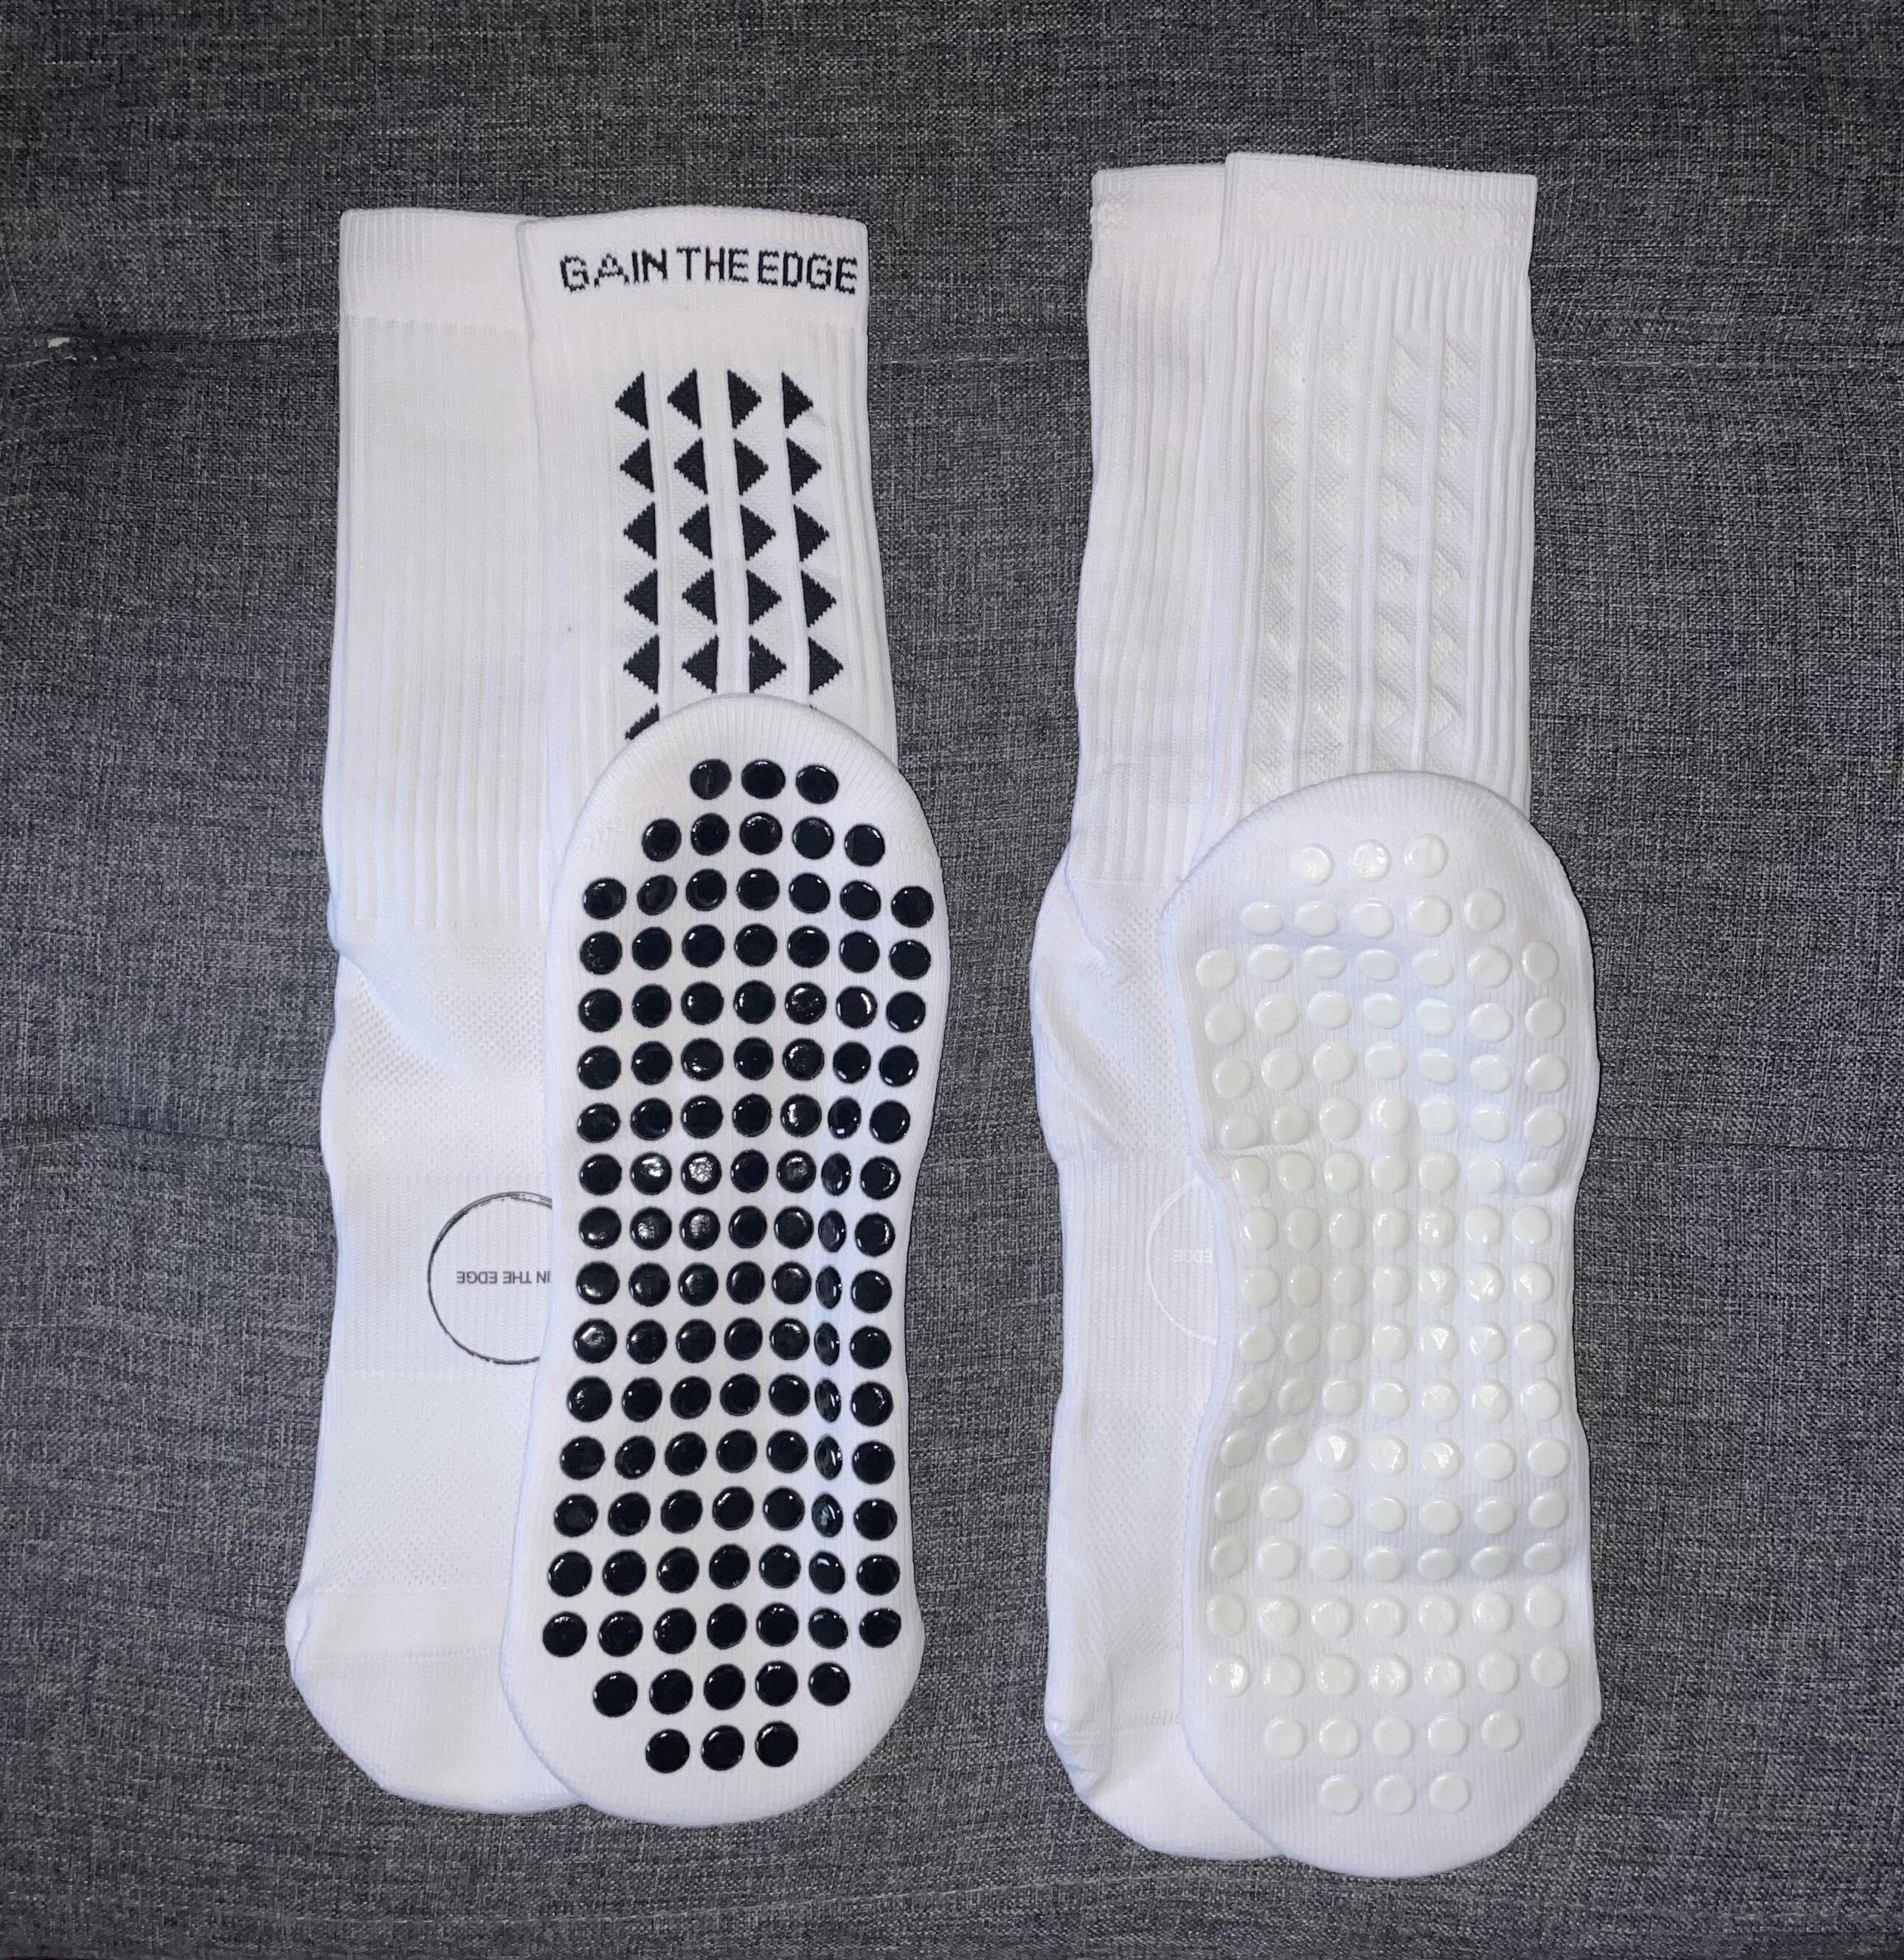 How to Wear Grip Socks (Steps, Tips & Products) – Gain The Edge